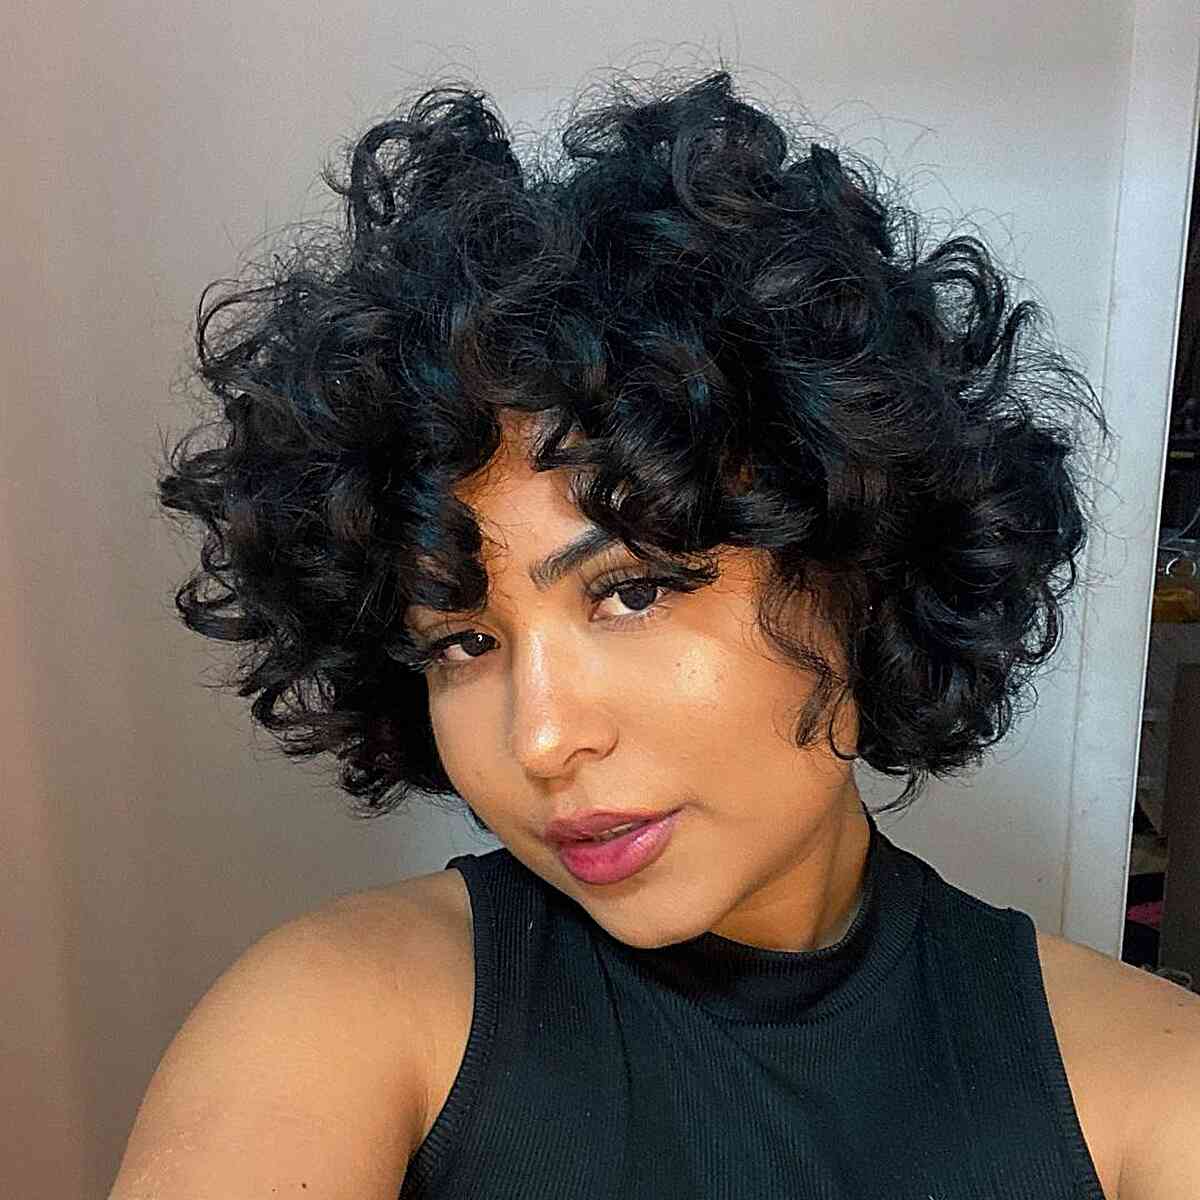 French Roast Black Curly Hair